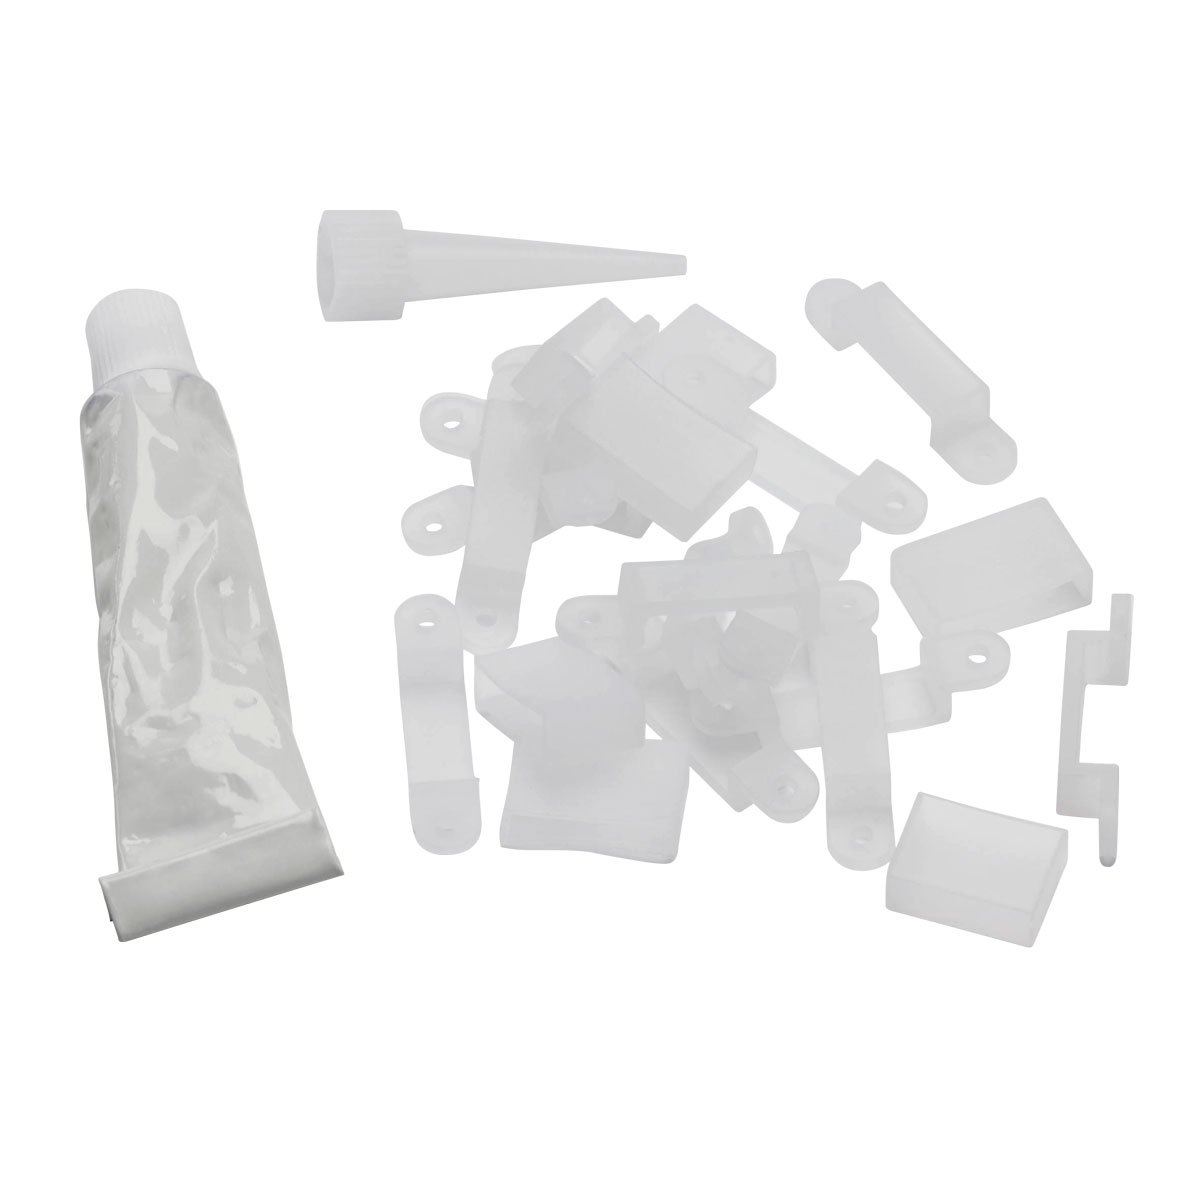 Kit containing 15 eye straps, 5 caps and 1 silicone protective sleeve for IP65 ribbon